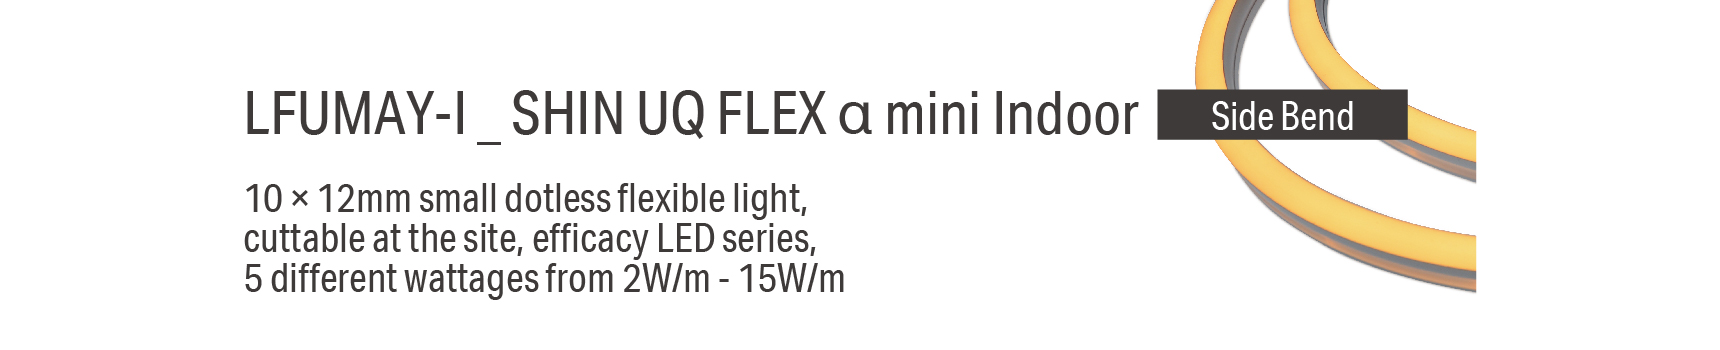 LFUMAY-I _ SHIN UQ FLEX α mini Indoor 10 × 12mm small dotless flexible light, cuttable at the site, efficacy LED series, 5 different wattages from 2W/m - 15W/m